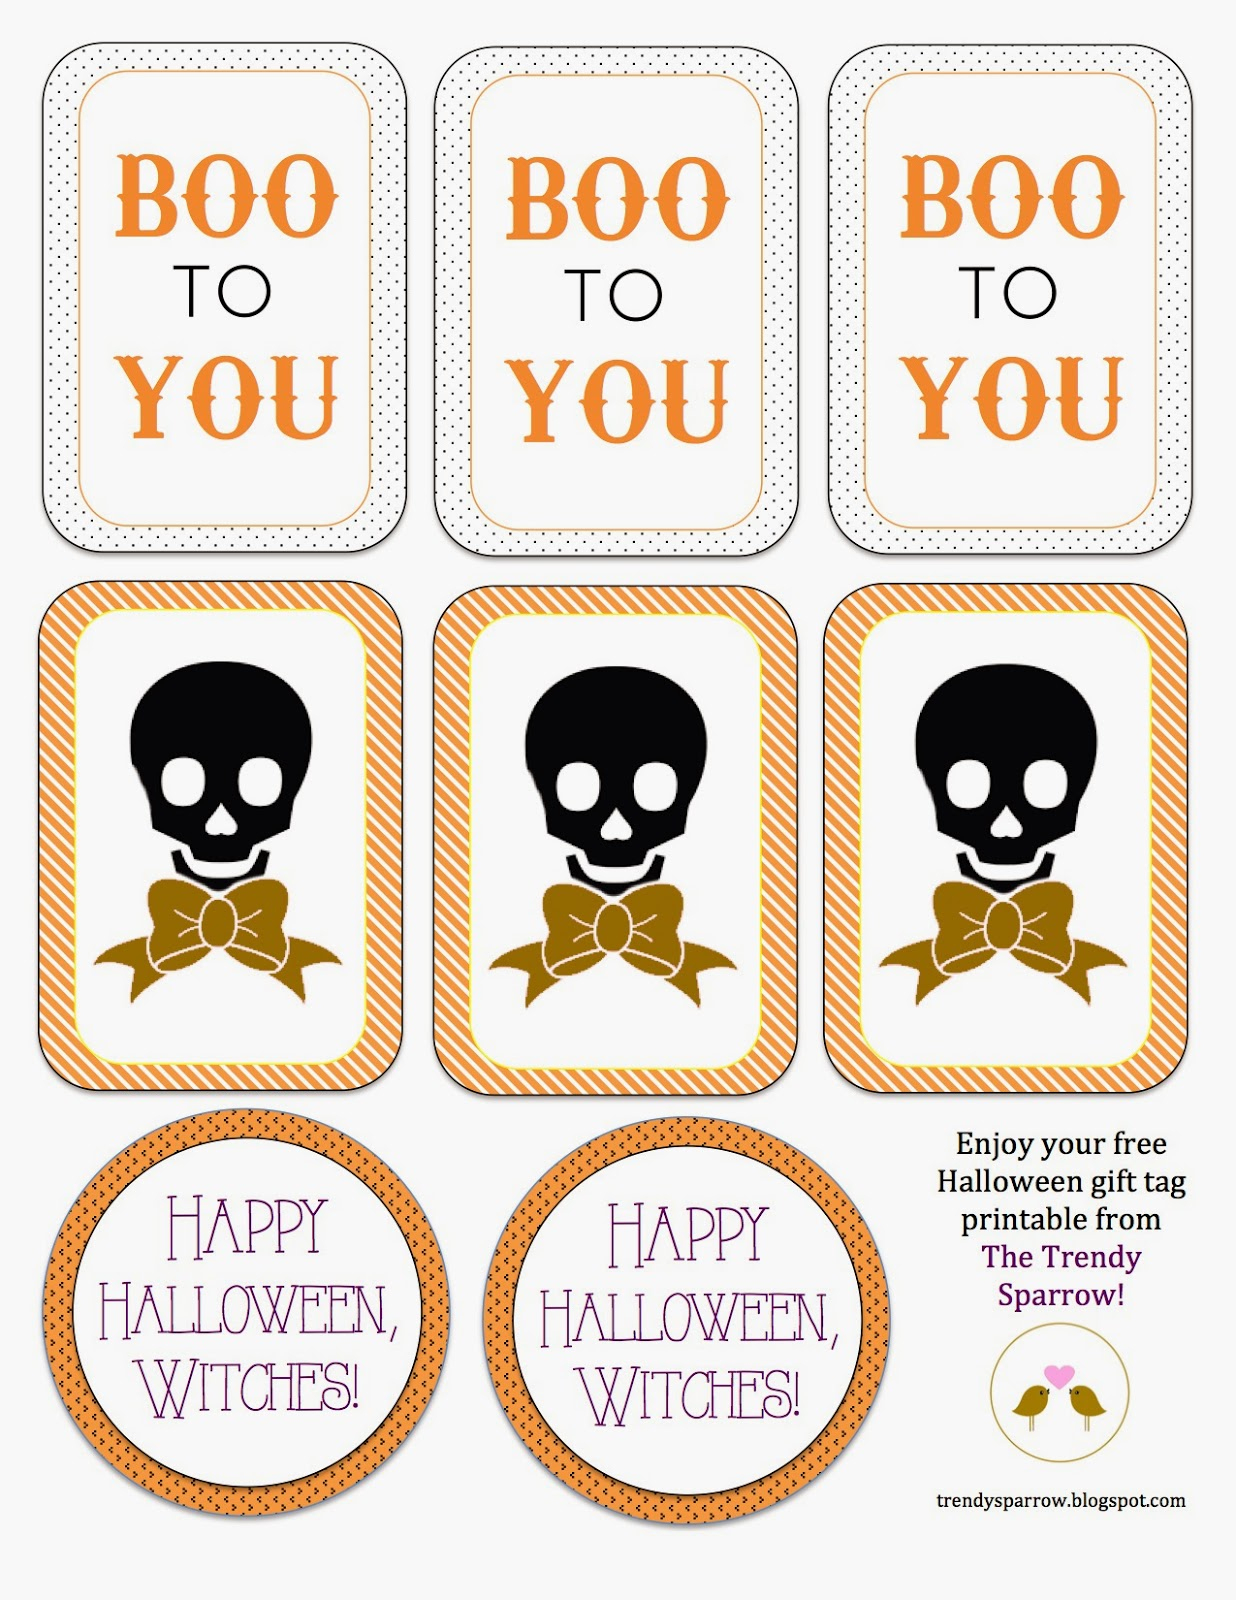 8-colorful-free-printable-gift-tags-for-any-occasion-free-printable-gift-bag-tags-free